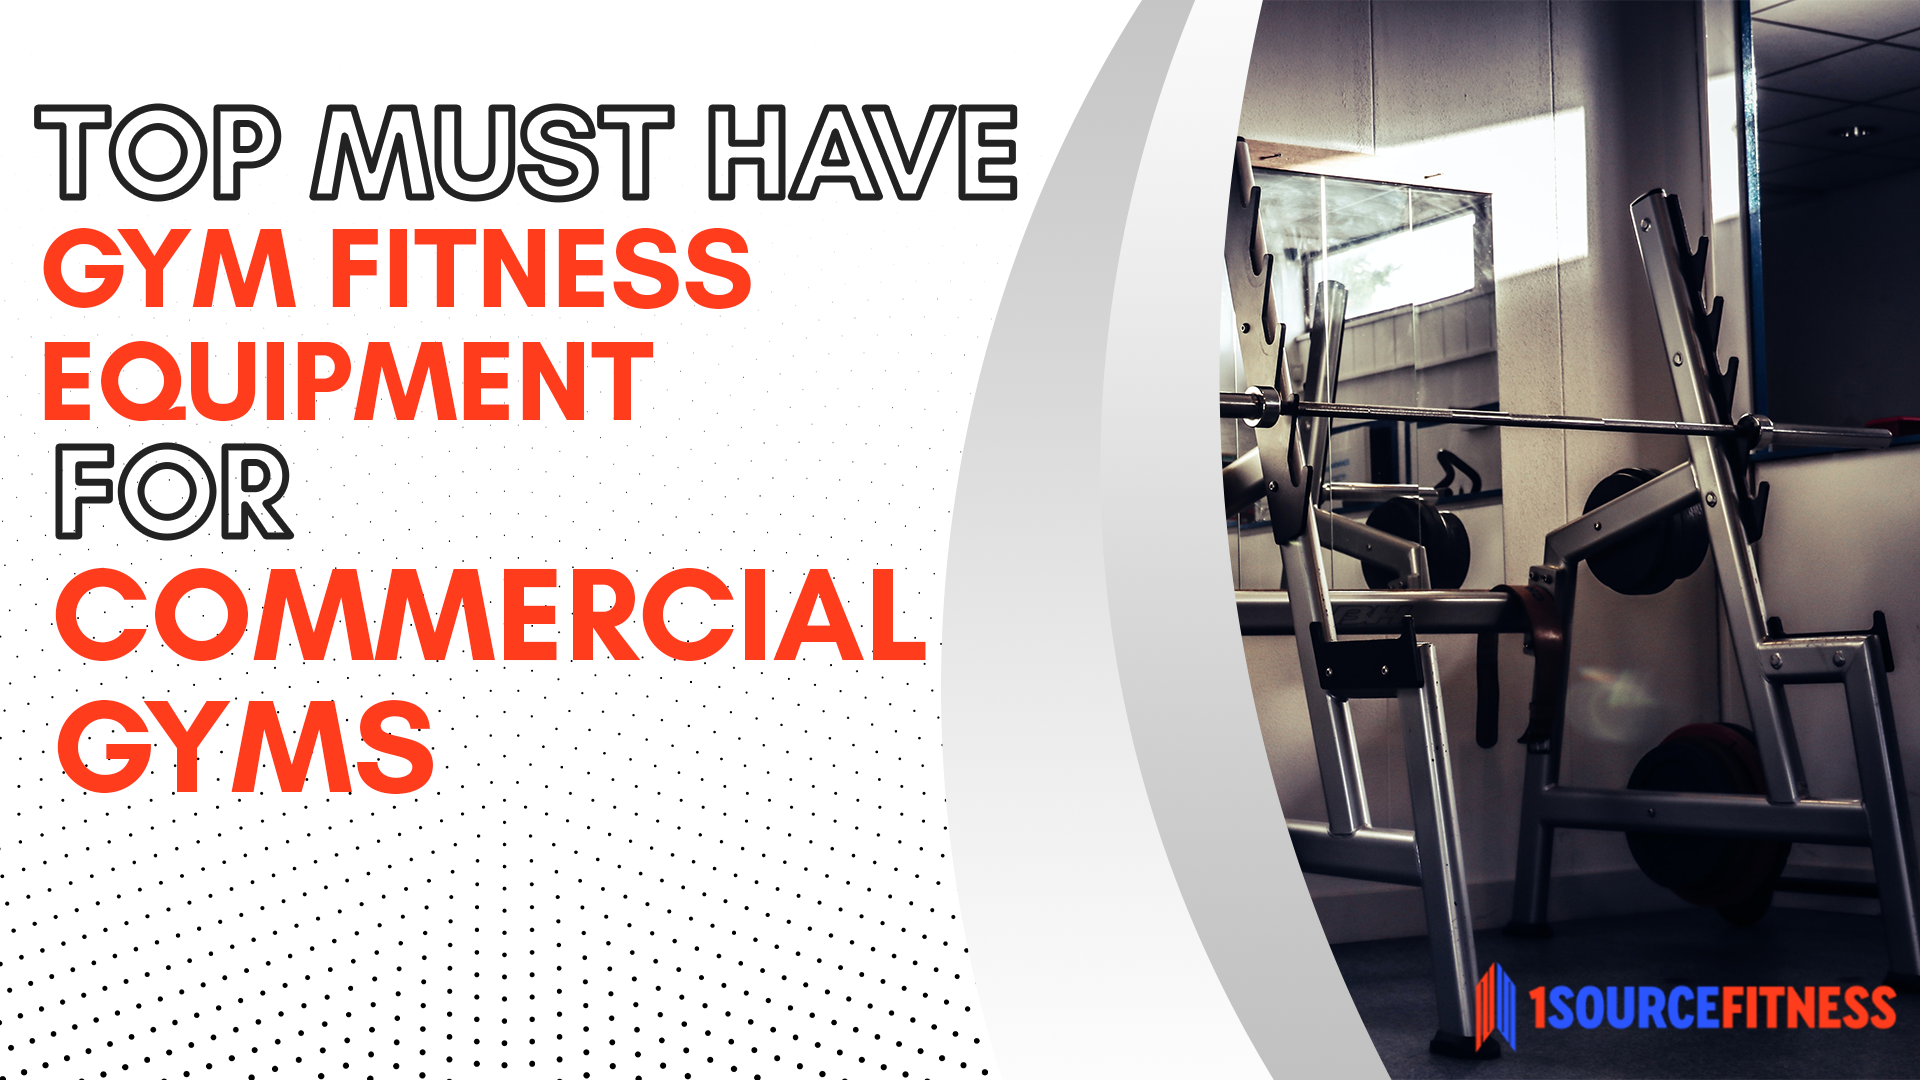 Top Must-Have Gym Fitness Equipment for Commercial Gyms